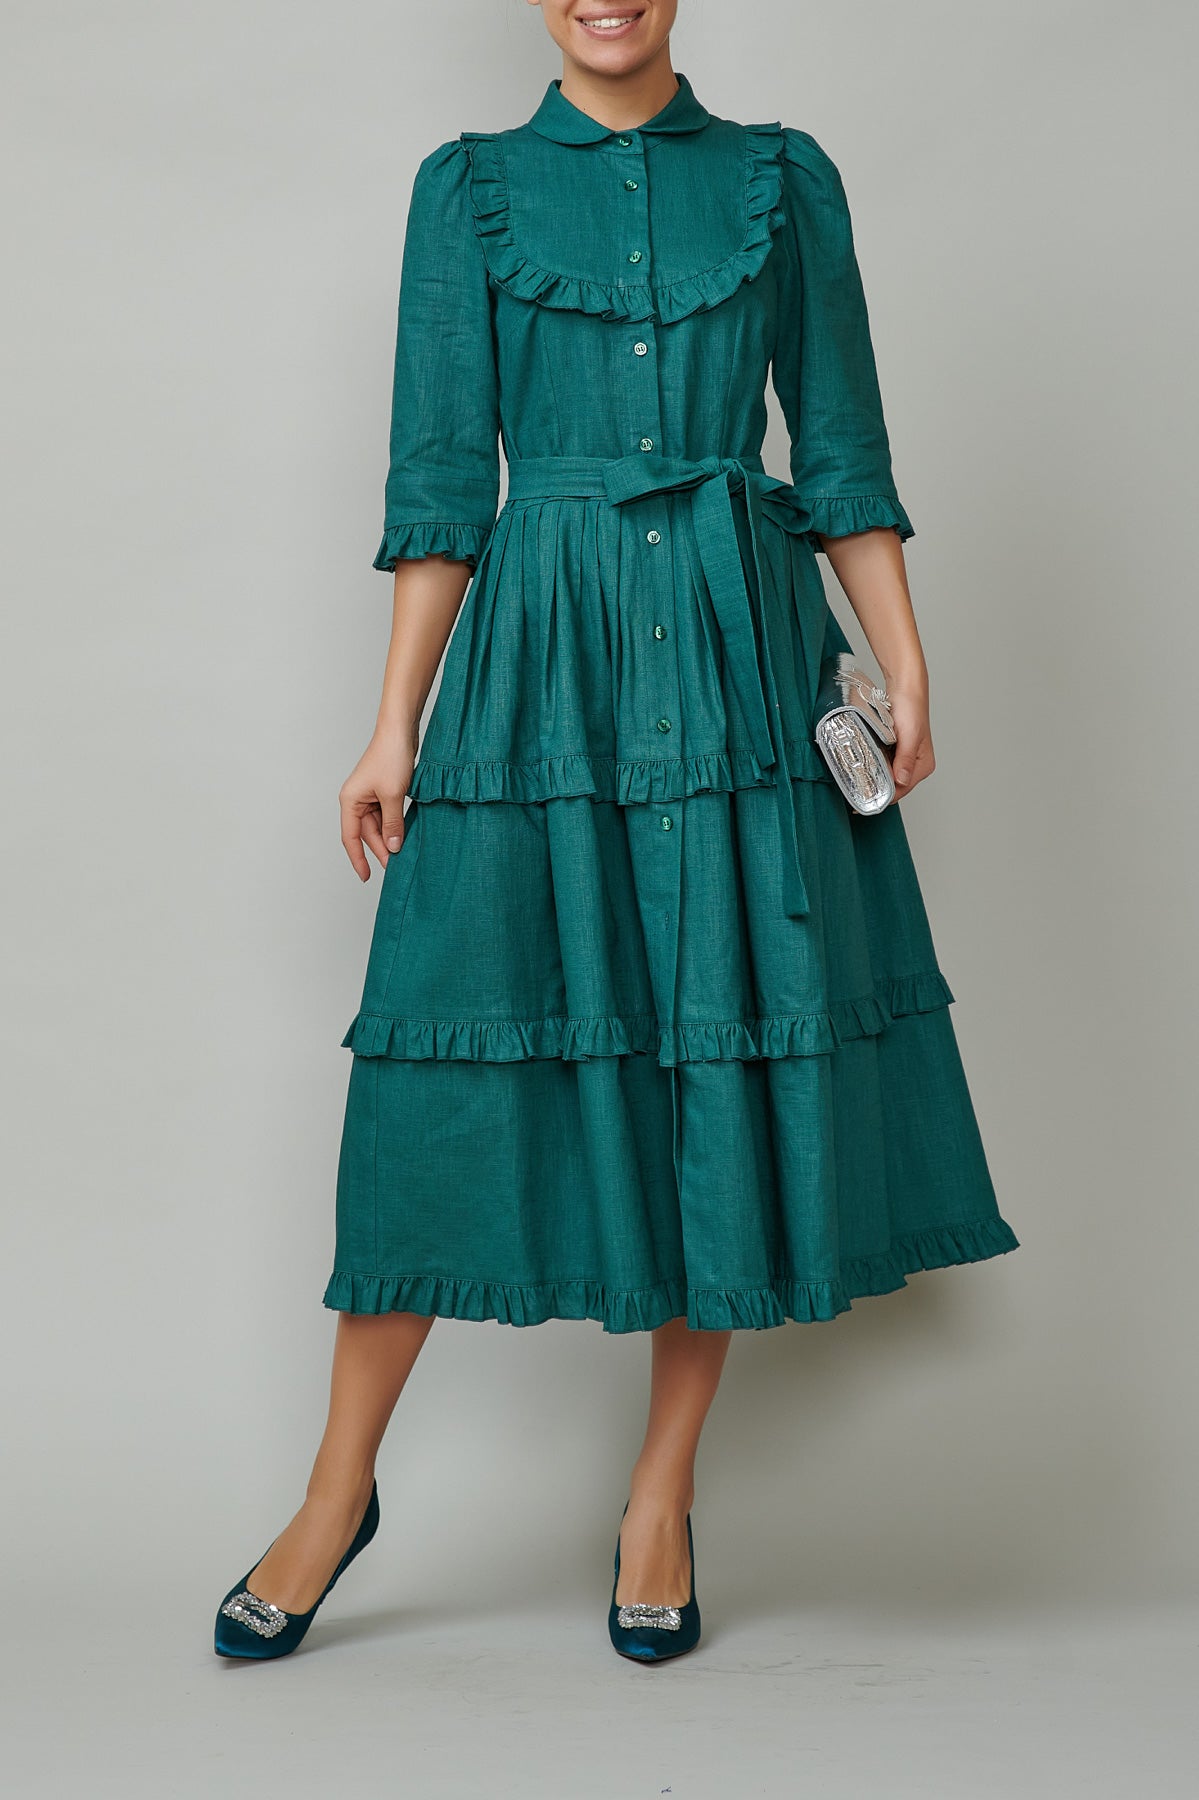 Shirt dress with round placket and frills, made of green linen